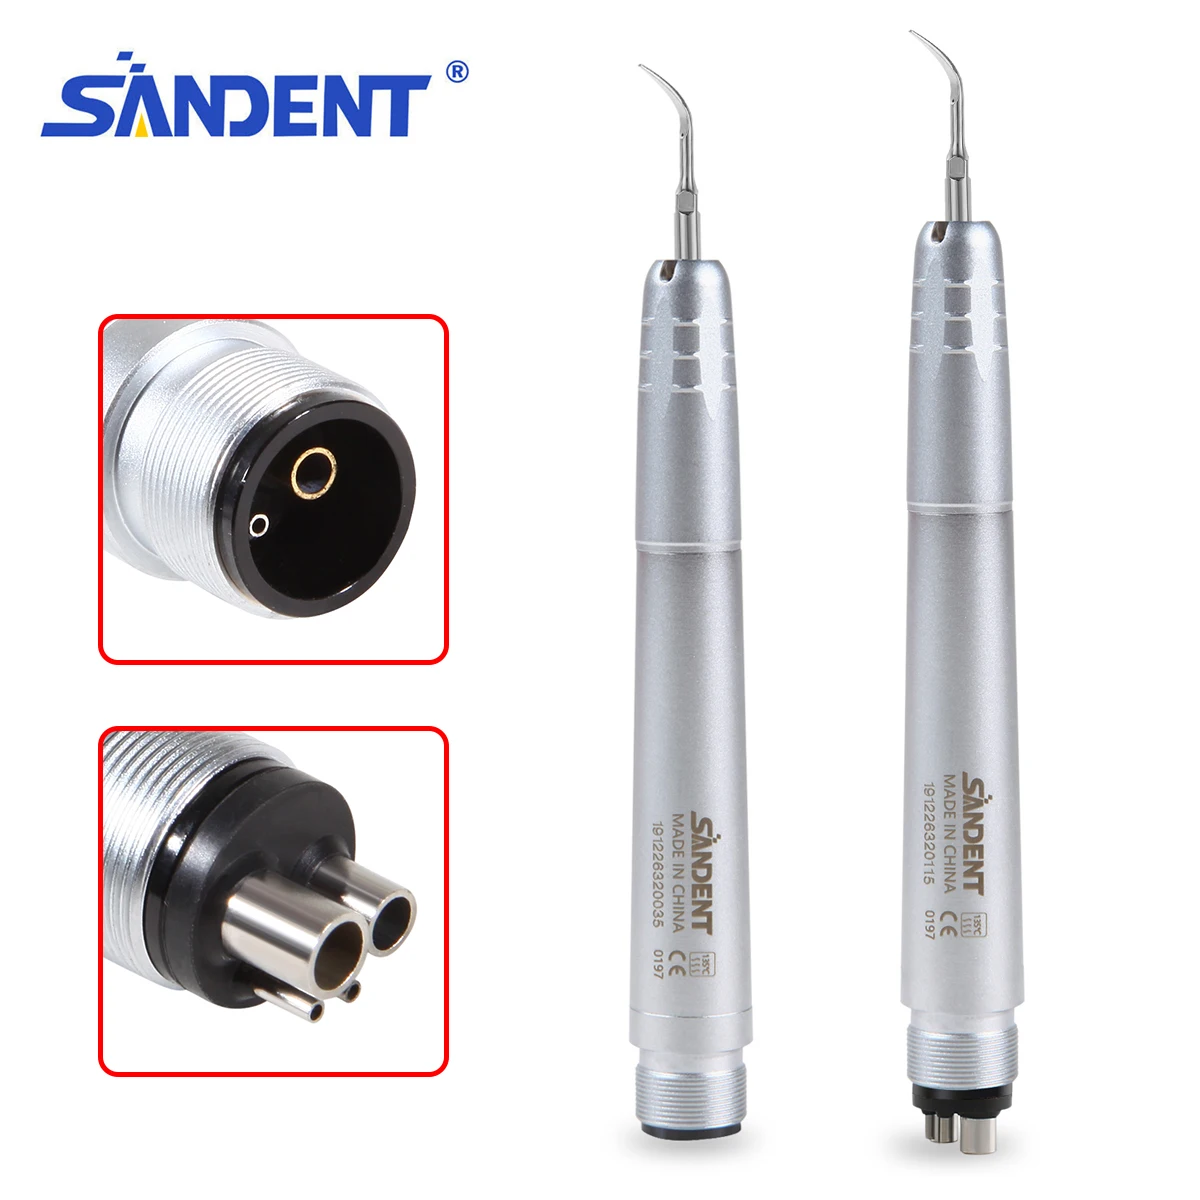 

SANDENT For Cleaning Teeth 4/2 Holes Dental Ultrasonic Air Perio Scaler Handpiece Hygienist wrench 3 Tips G1/G2/G4 Dental Tools